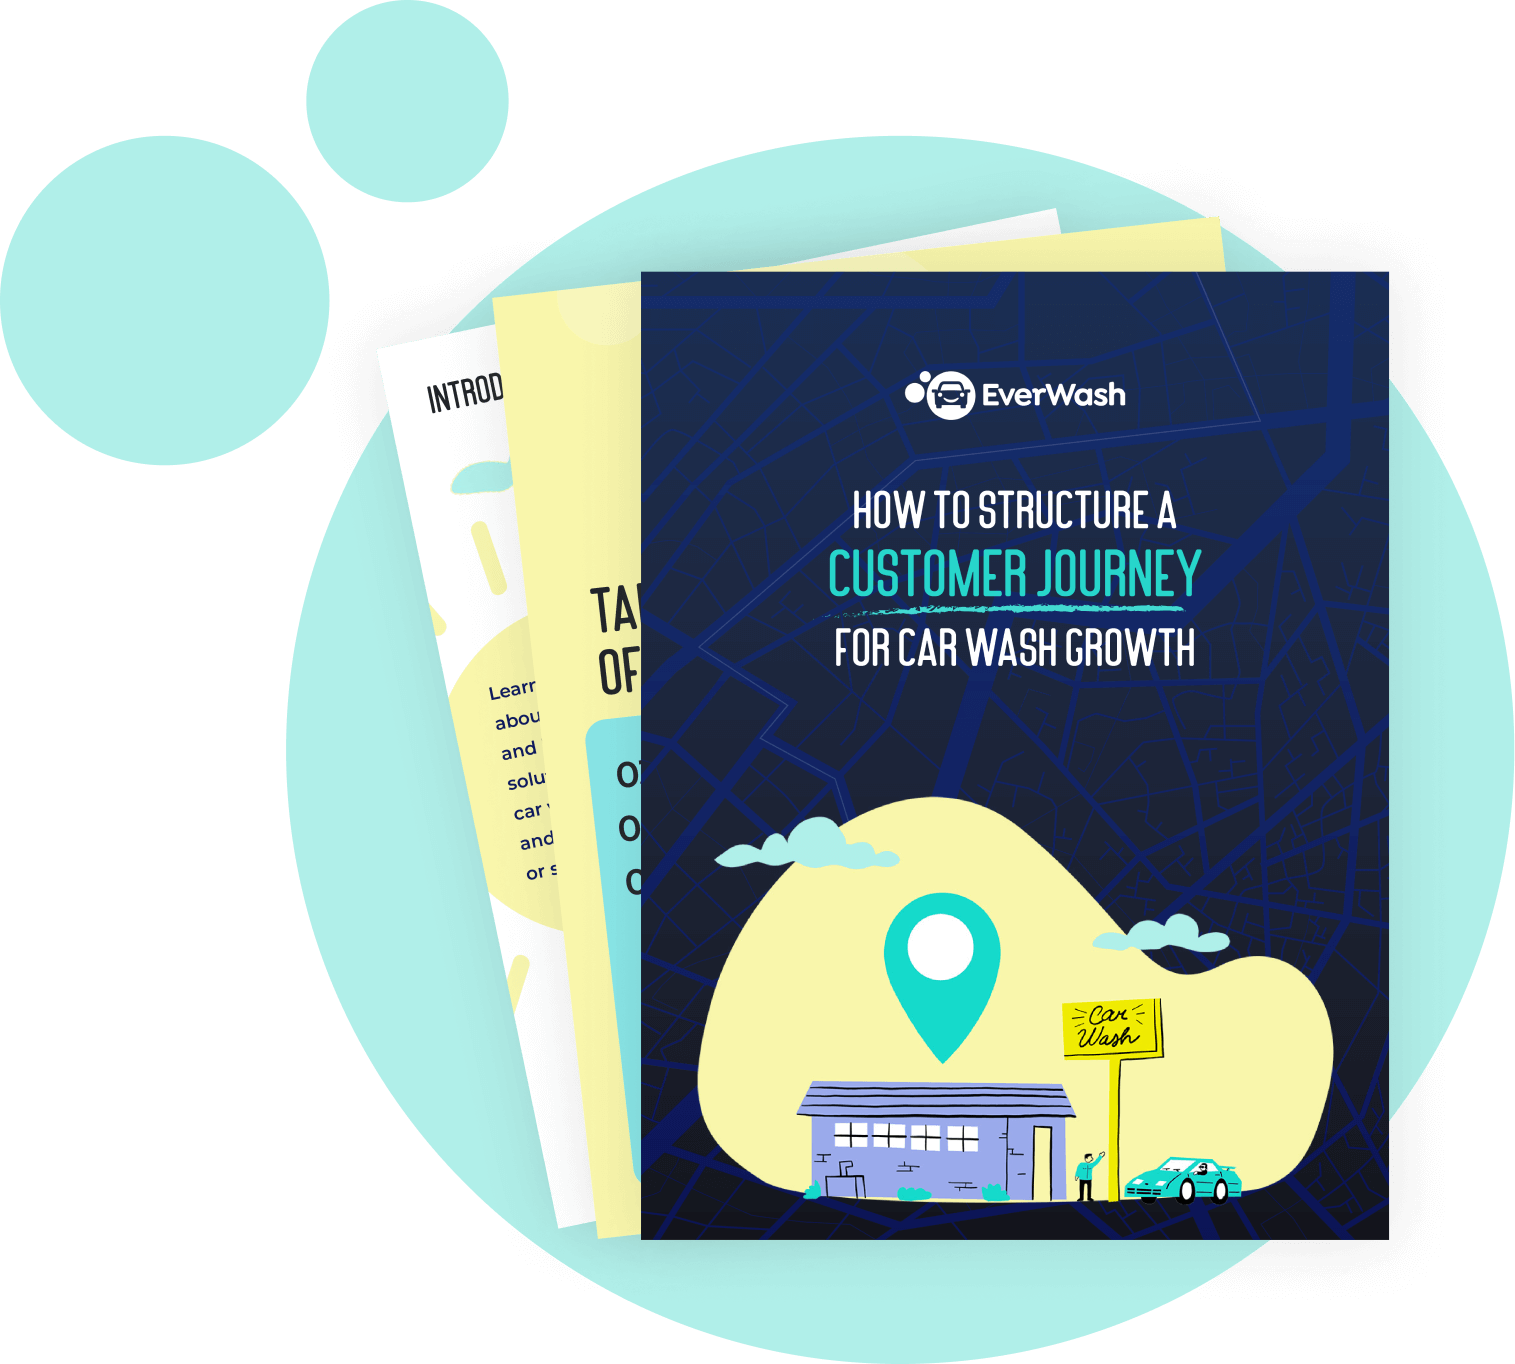 The cover of the eBook, How to Structure a Customer Journey for Car Wash Growth.